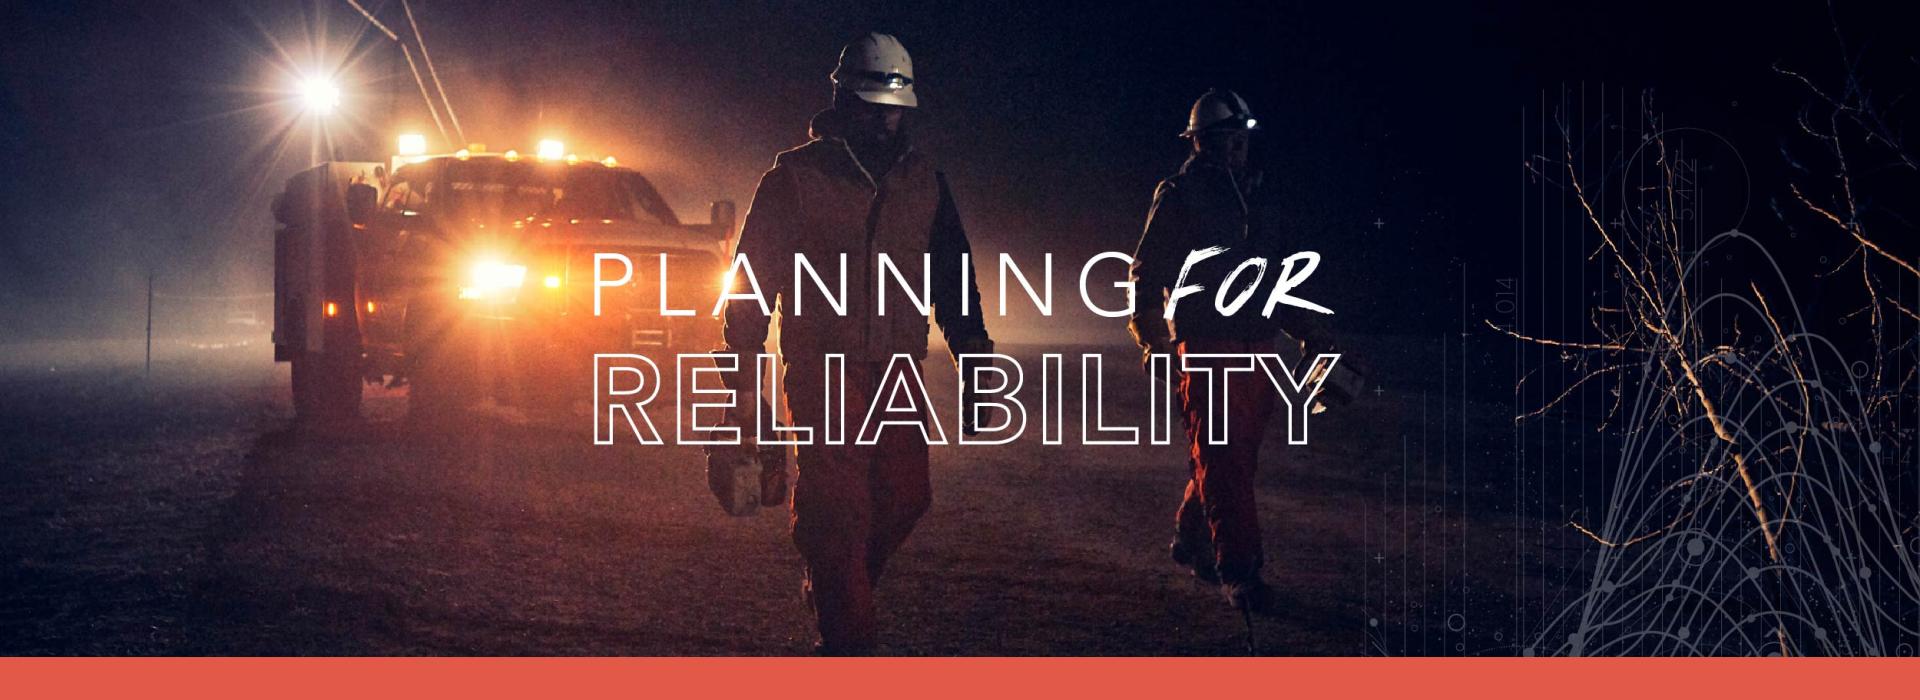 Planning for Reliability